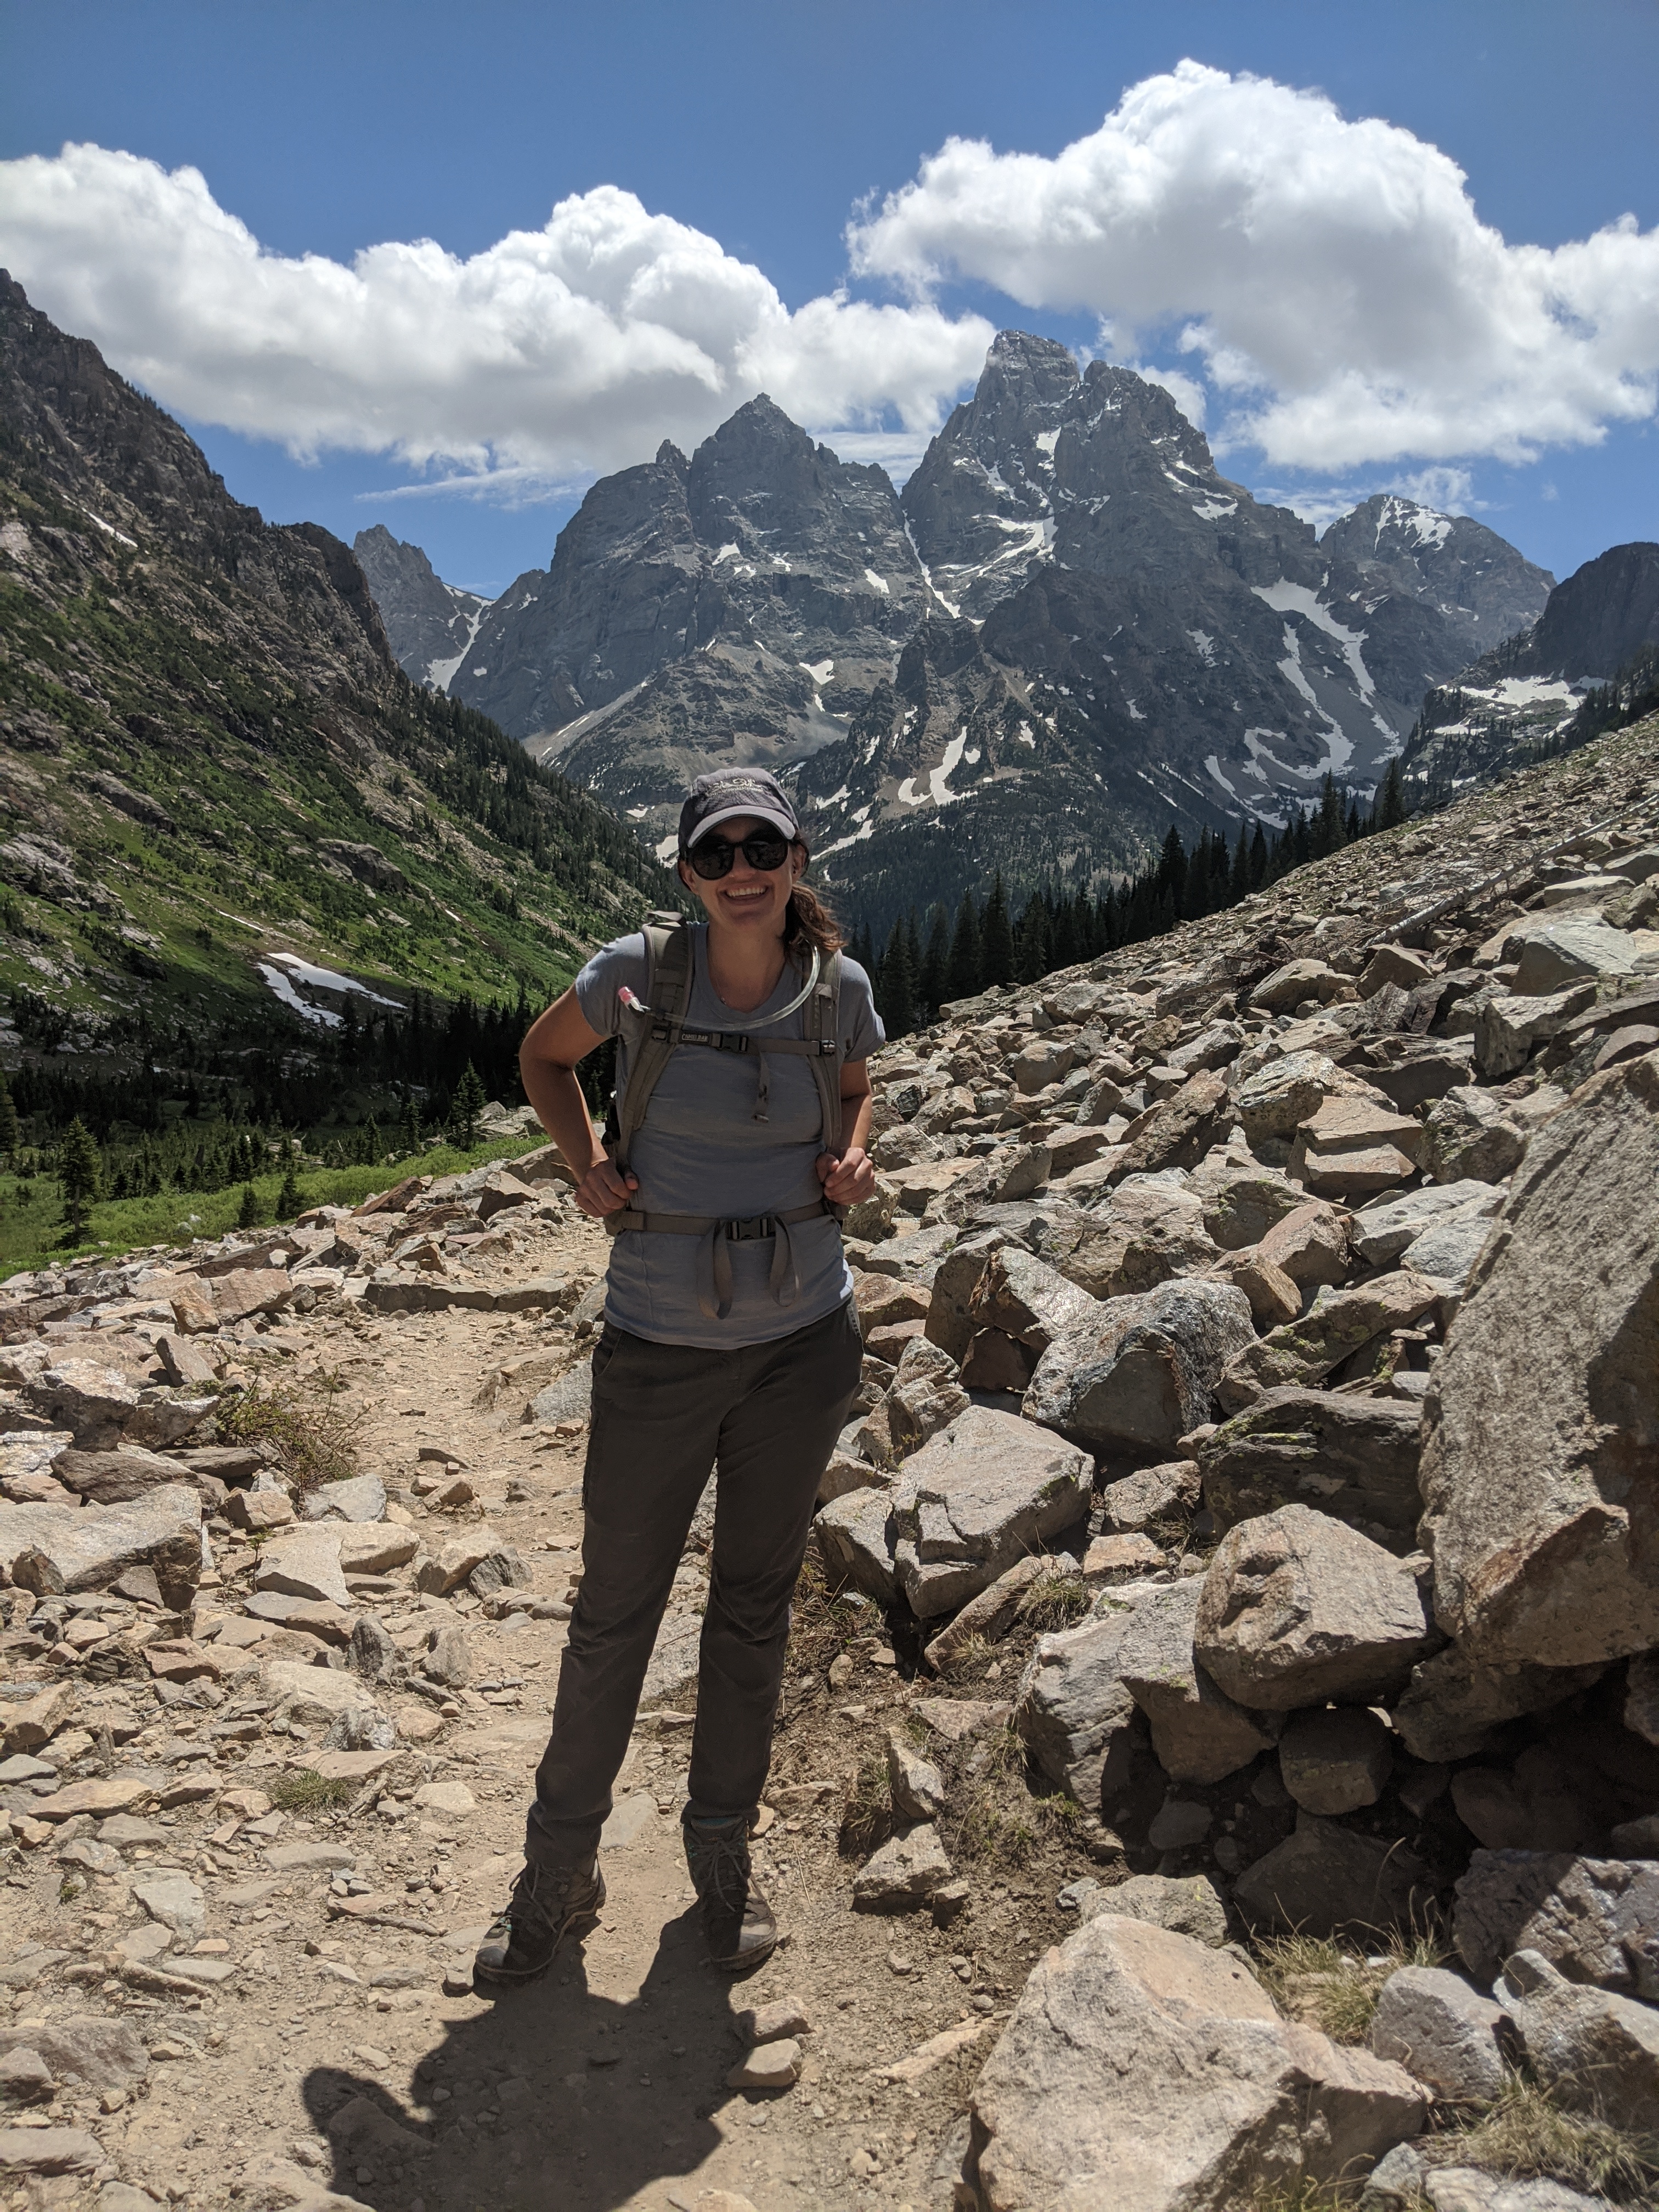 A 2021 Scientists in Park Fellow smiles for the camera with hiking gear on in front of her site in a rocky mountain chain.